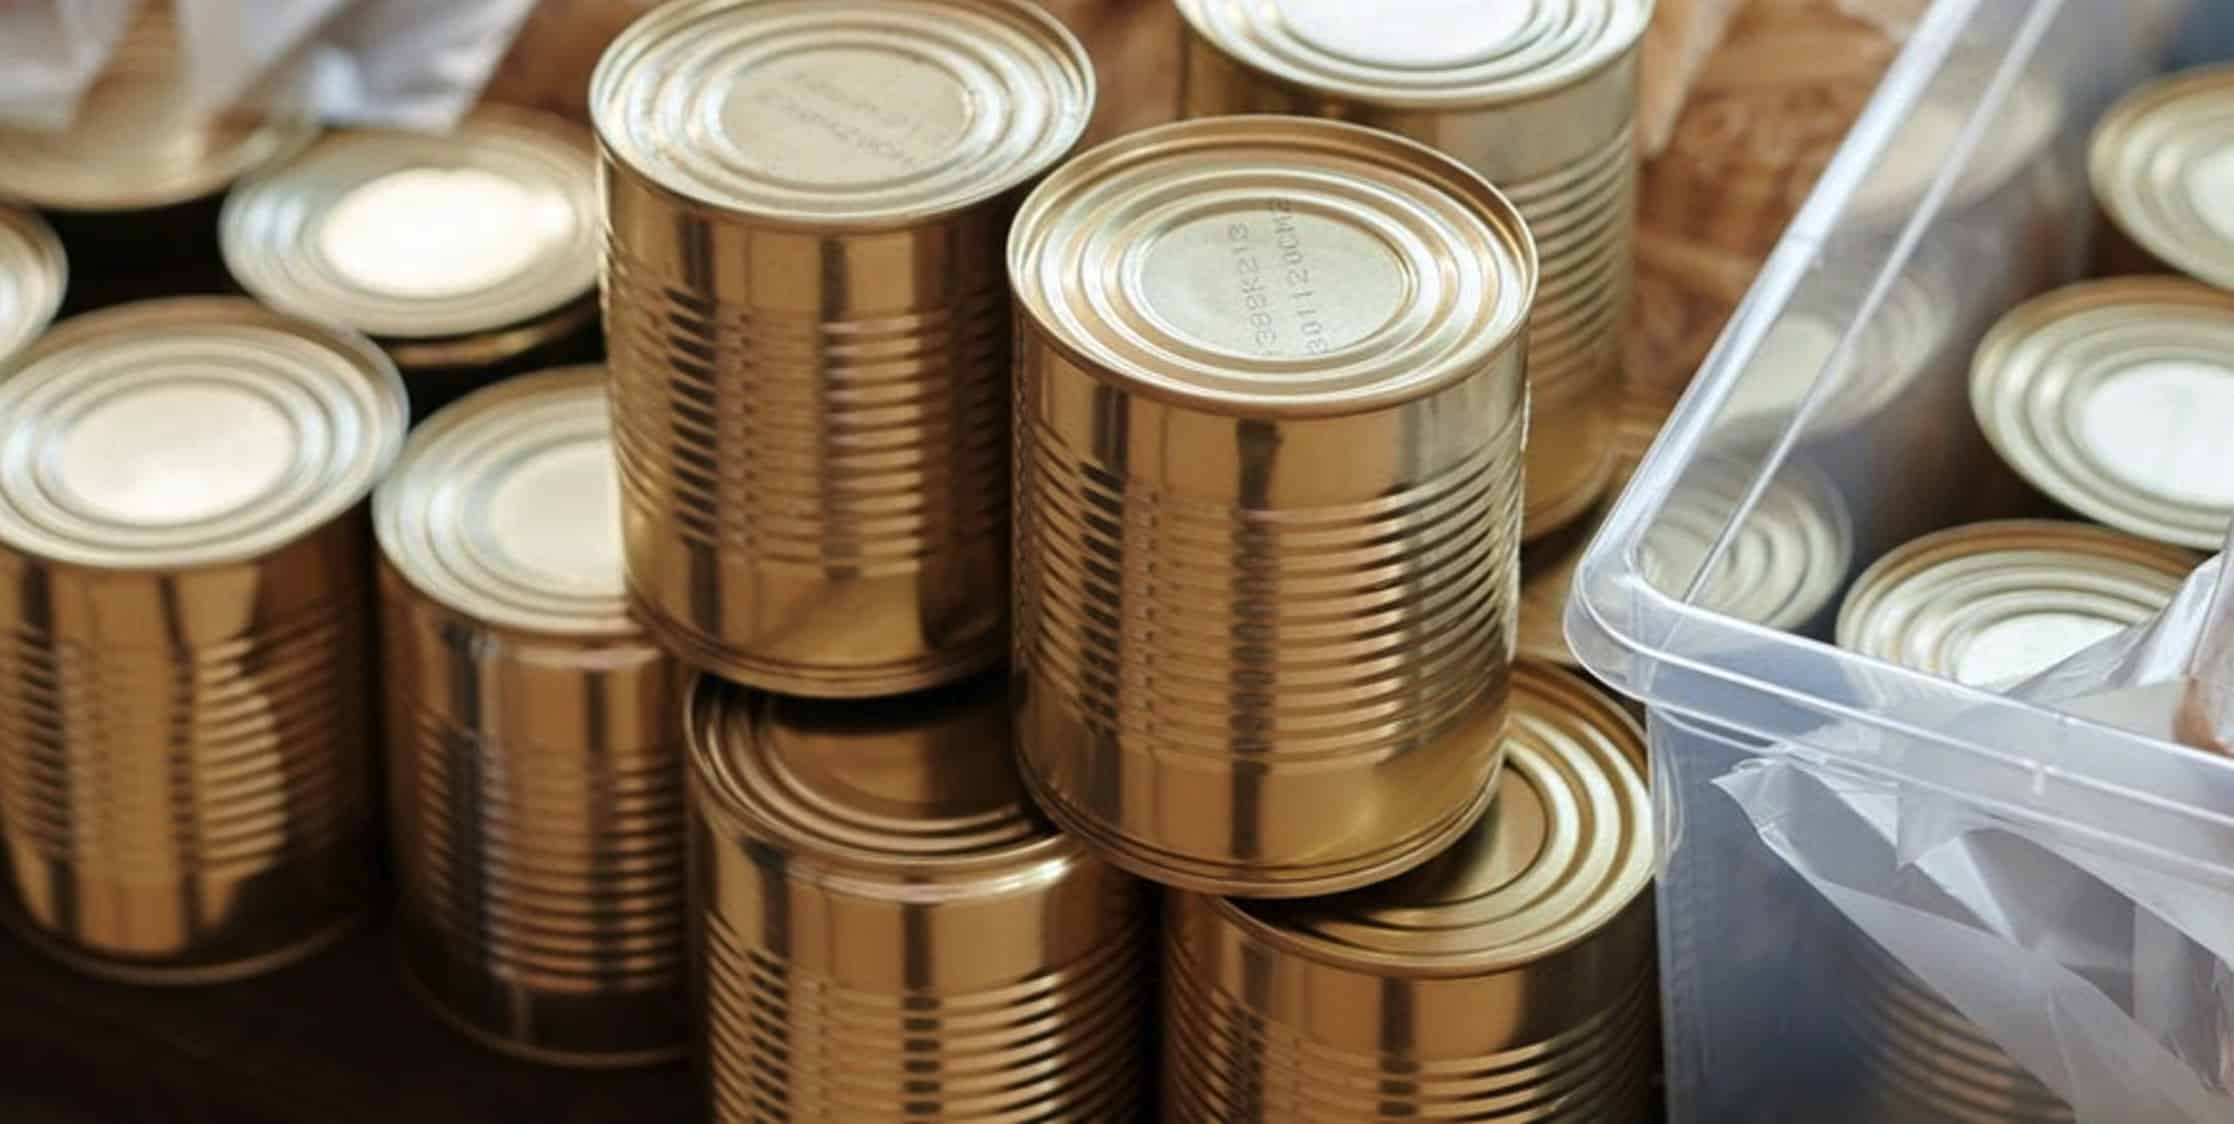 How To Open A Can Without A Can Opener - Bugoutbill.com